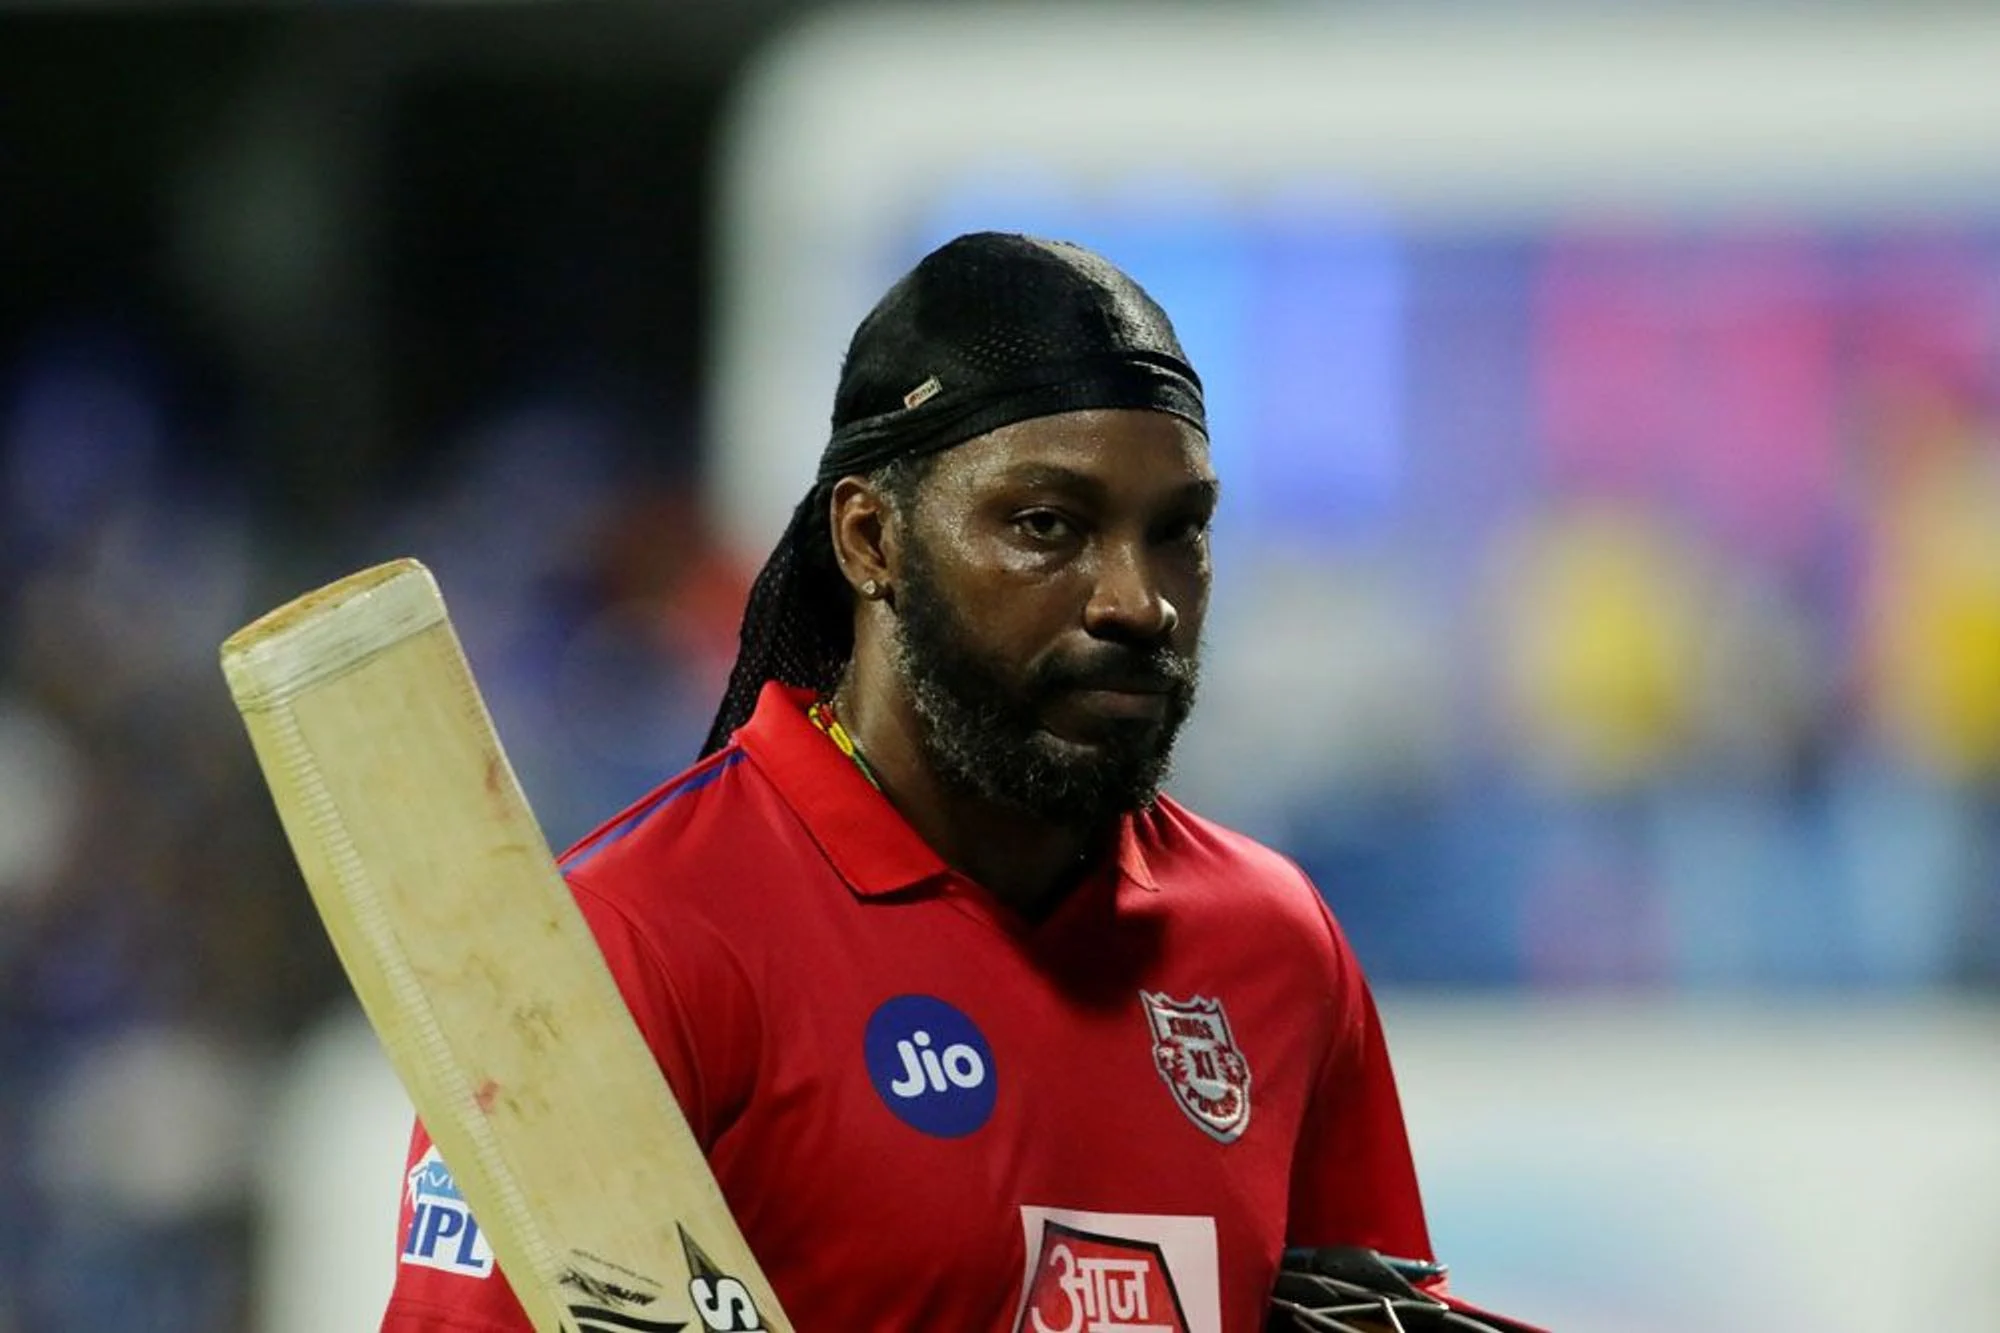 chris gayle wants fans to keep watching ipl2020 despite early end